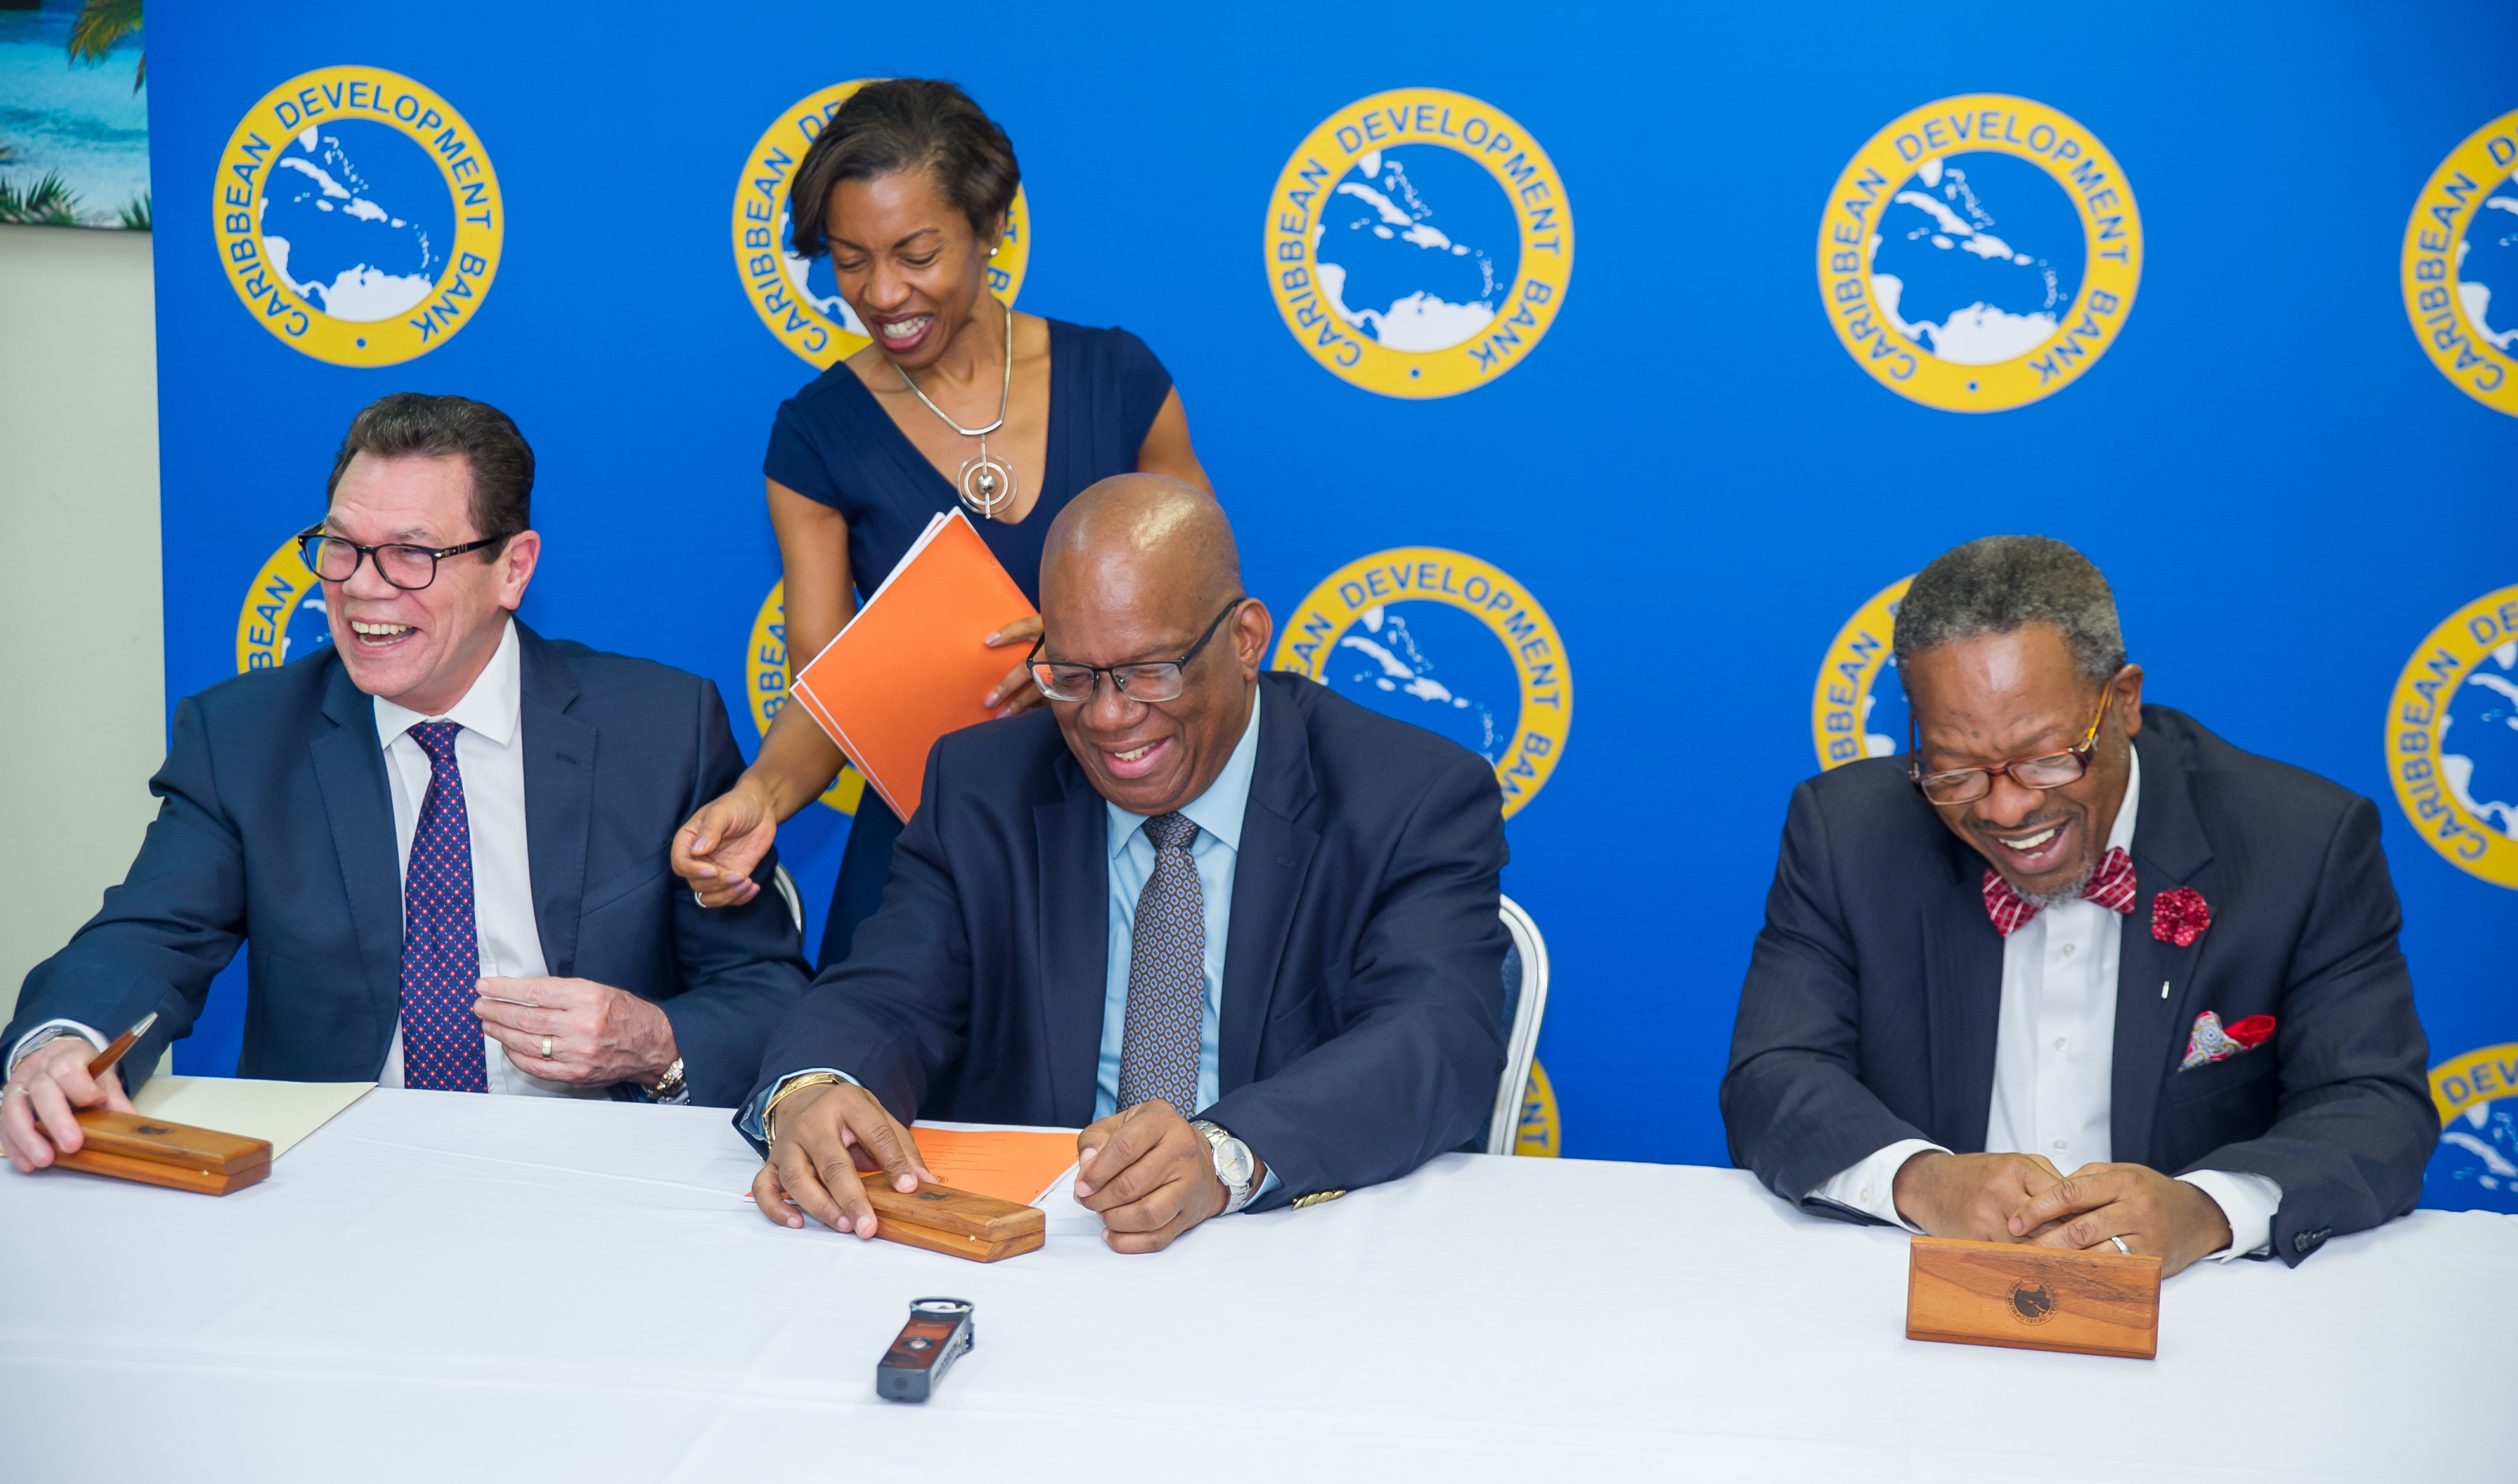 (L-R) Dr. Wm. Warren Smith, President, CDB, Hon. Winston Jordan, Minister of Finance, Guyana; and Ivelaw Lloyd Griffith, Vice-Chancellor of the University of Guyana prepare to sign the grant agreement on May 29. Assisting is Diana Wilson Patrick (standing), General Counsel, CDB.